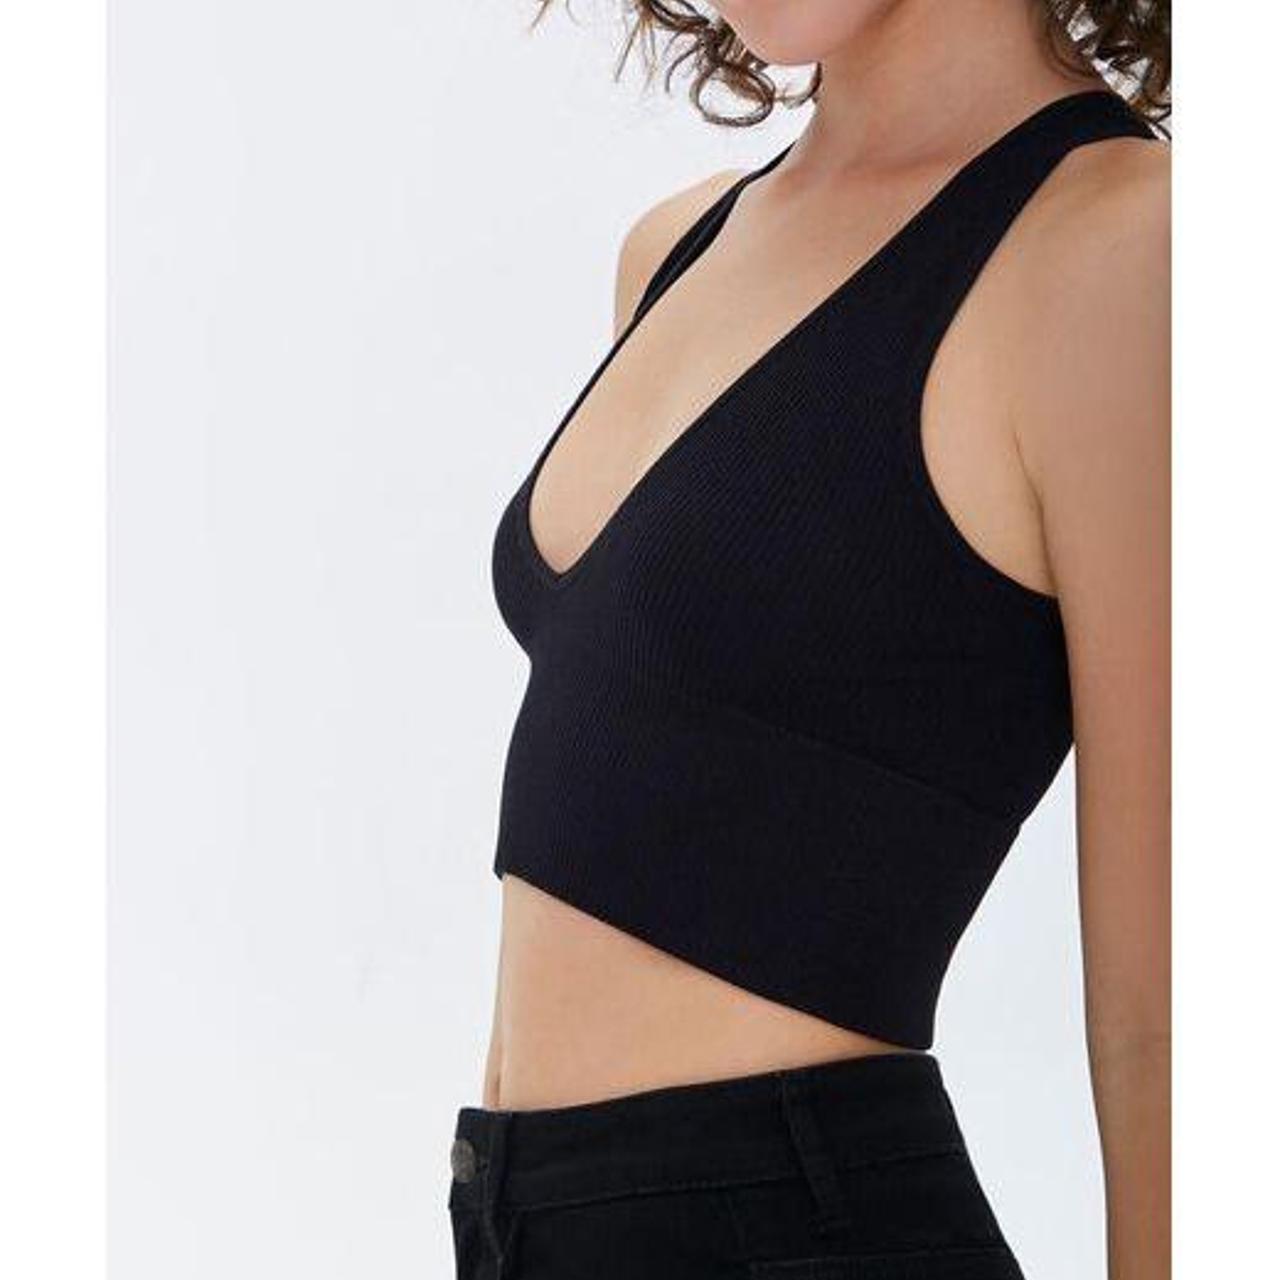 Product Image 1 - Forever 21 plunging crop top

Black